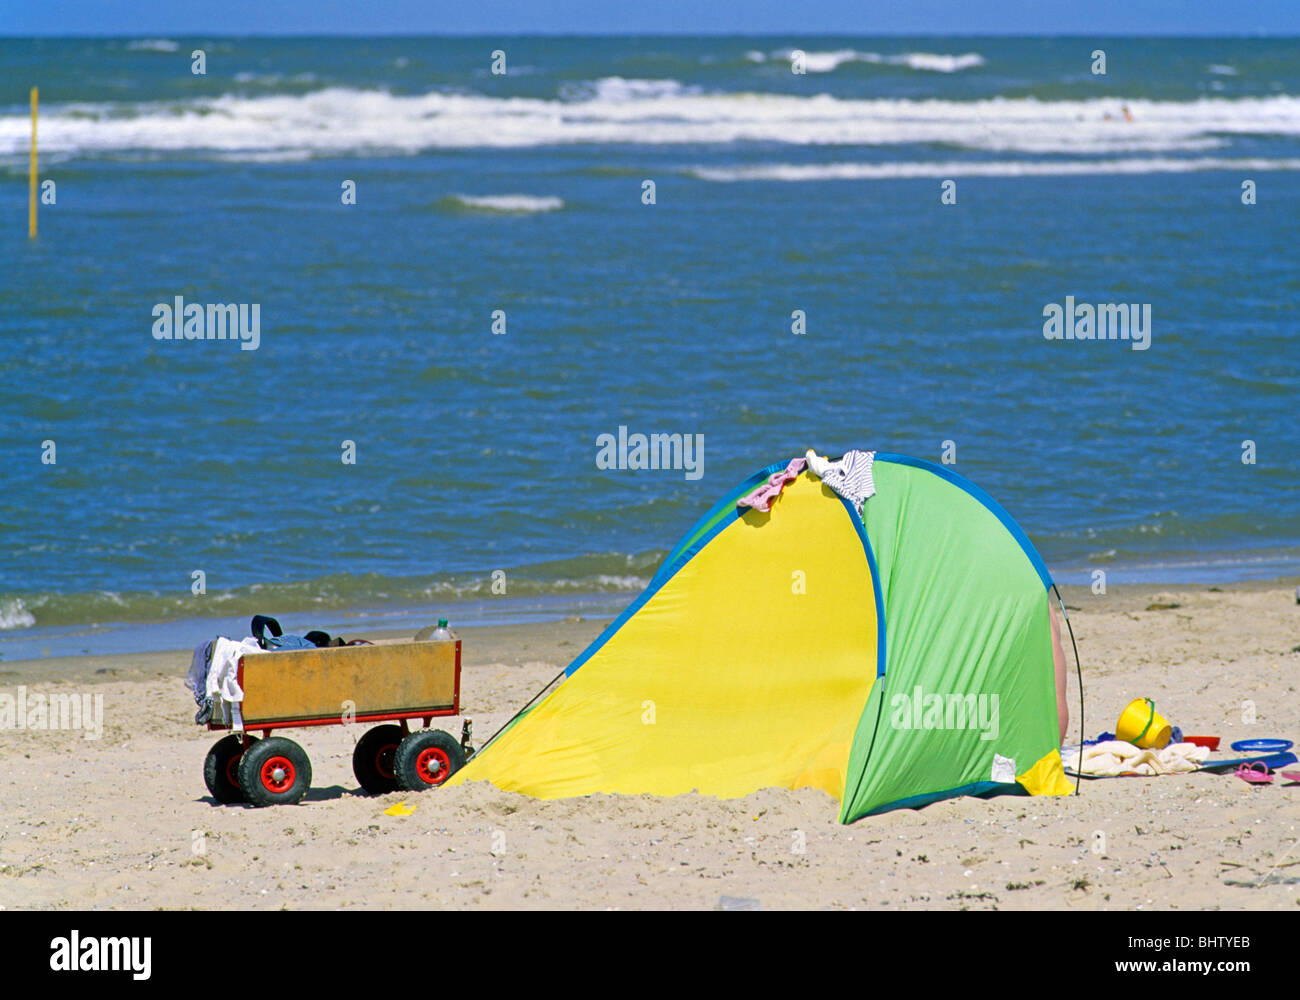 trolley and beach cabana at the beach of Spiekeroog Island, East Friesland, Lower Saxony, Germany Stock Photo